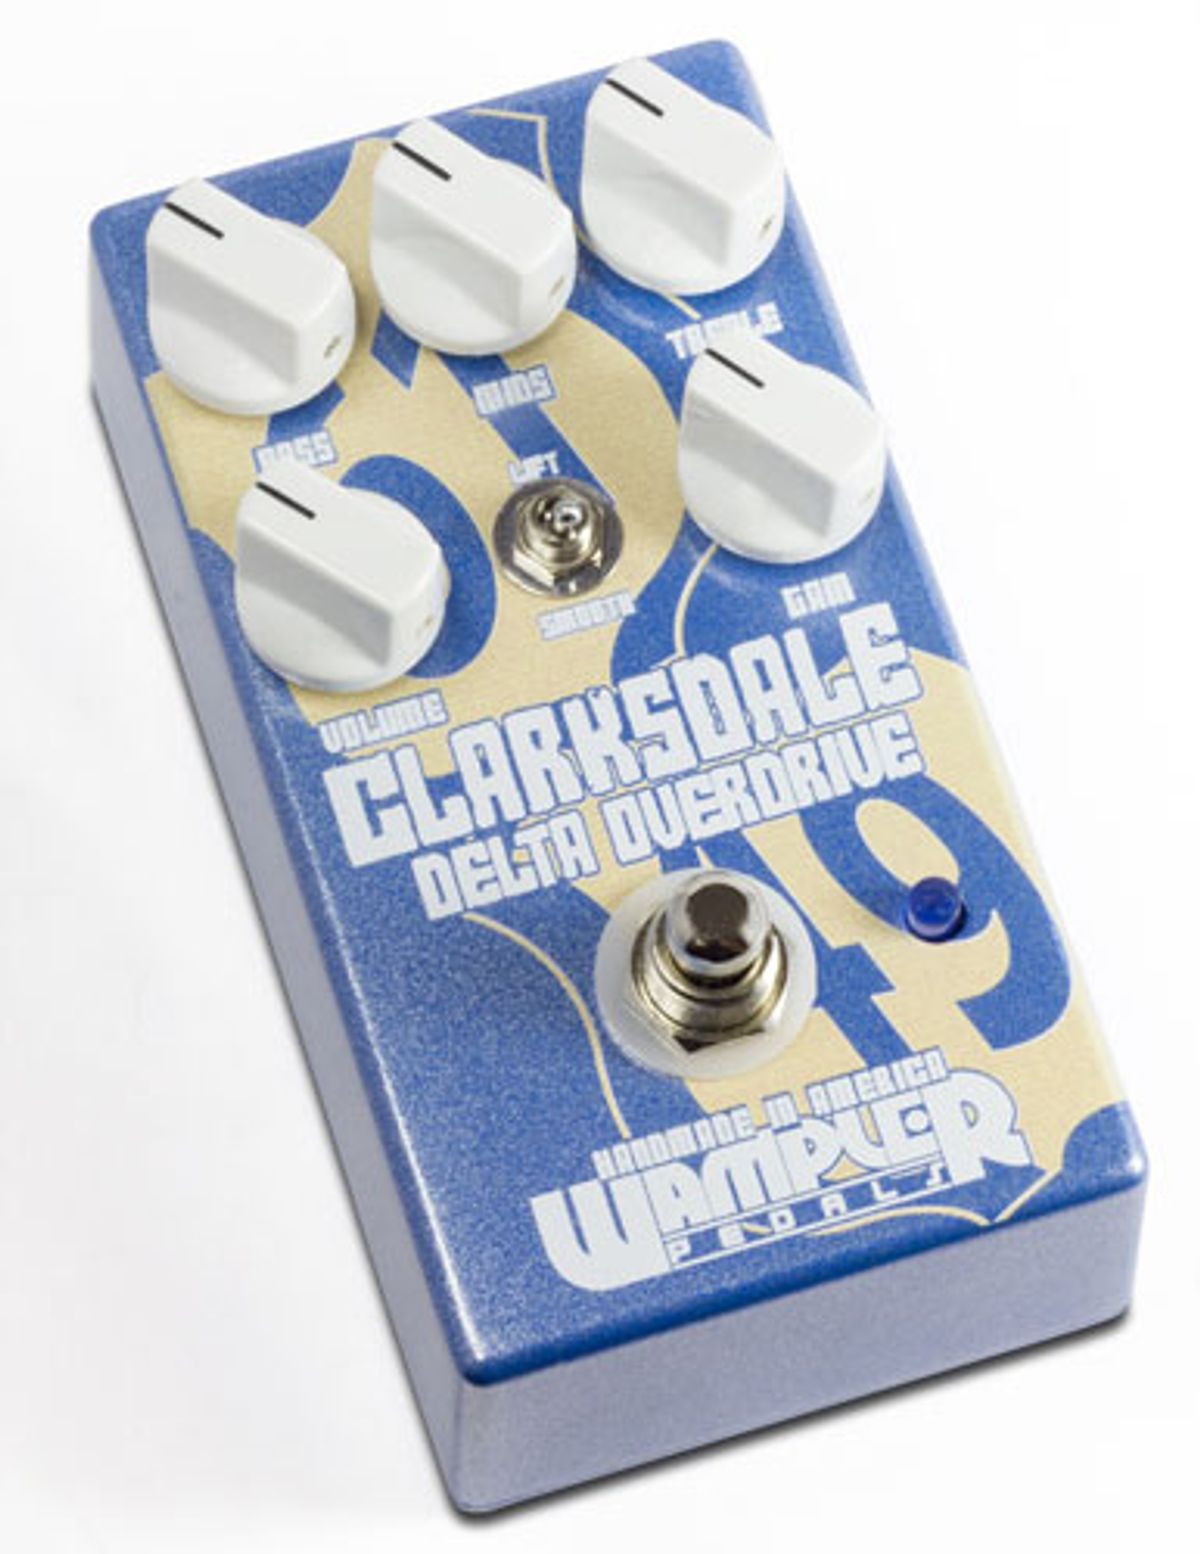 Wampler Pedals Announces the Clarksdale Overdrive